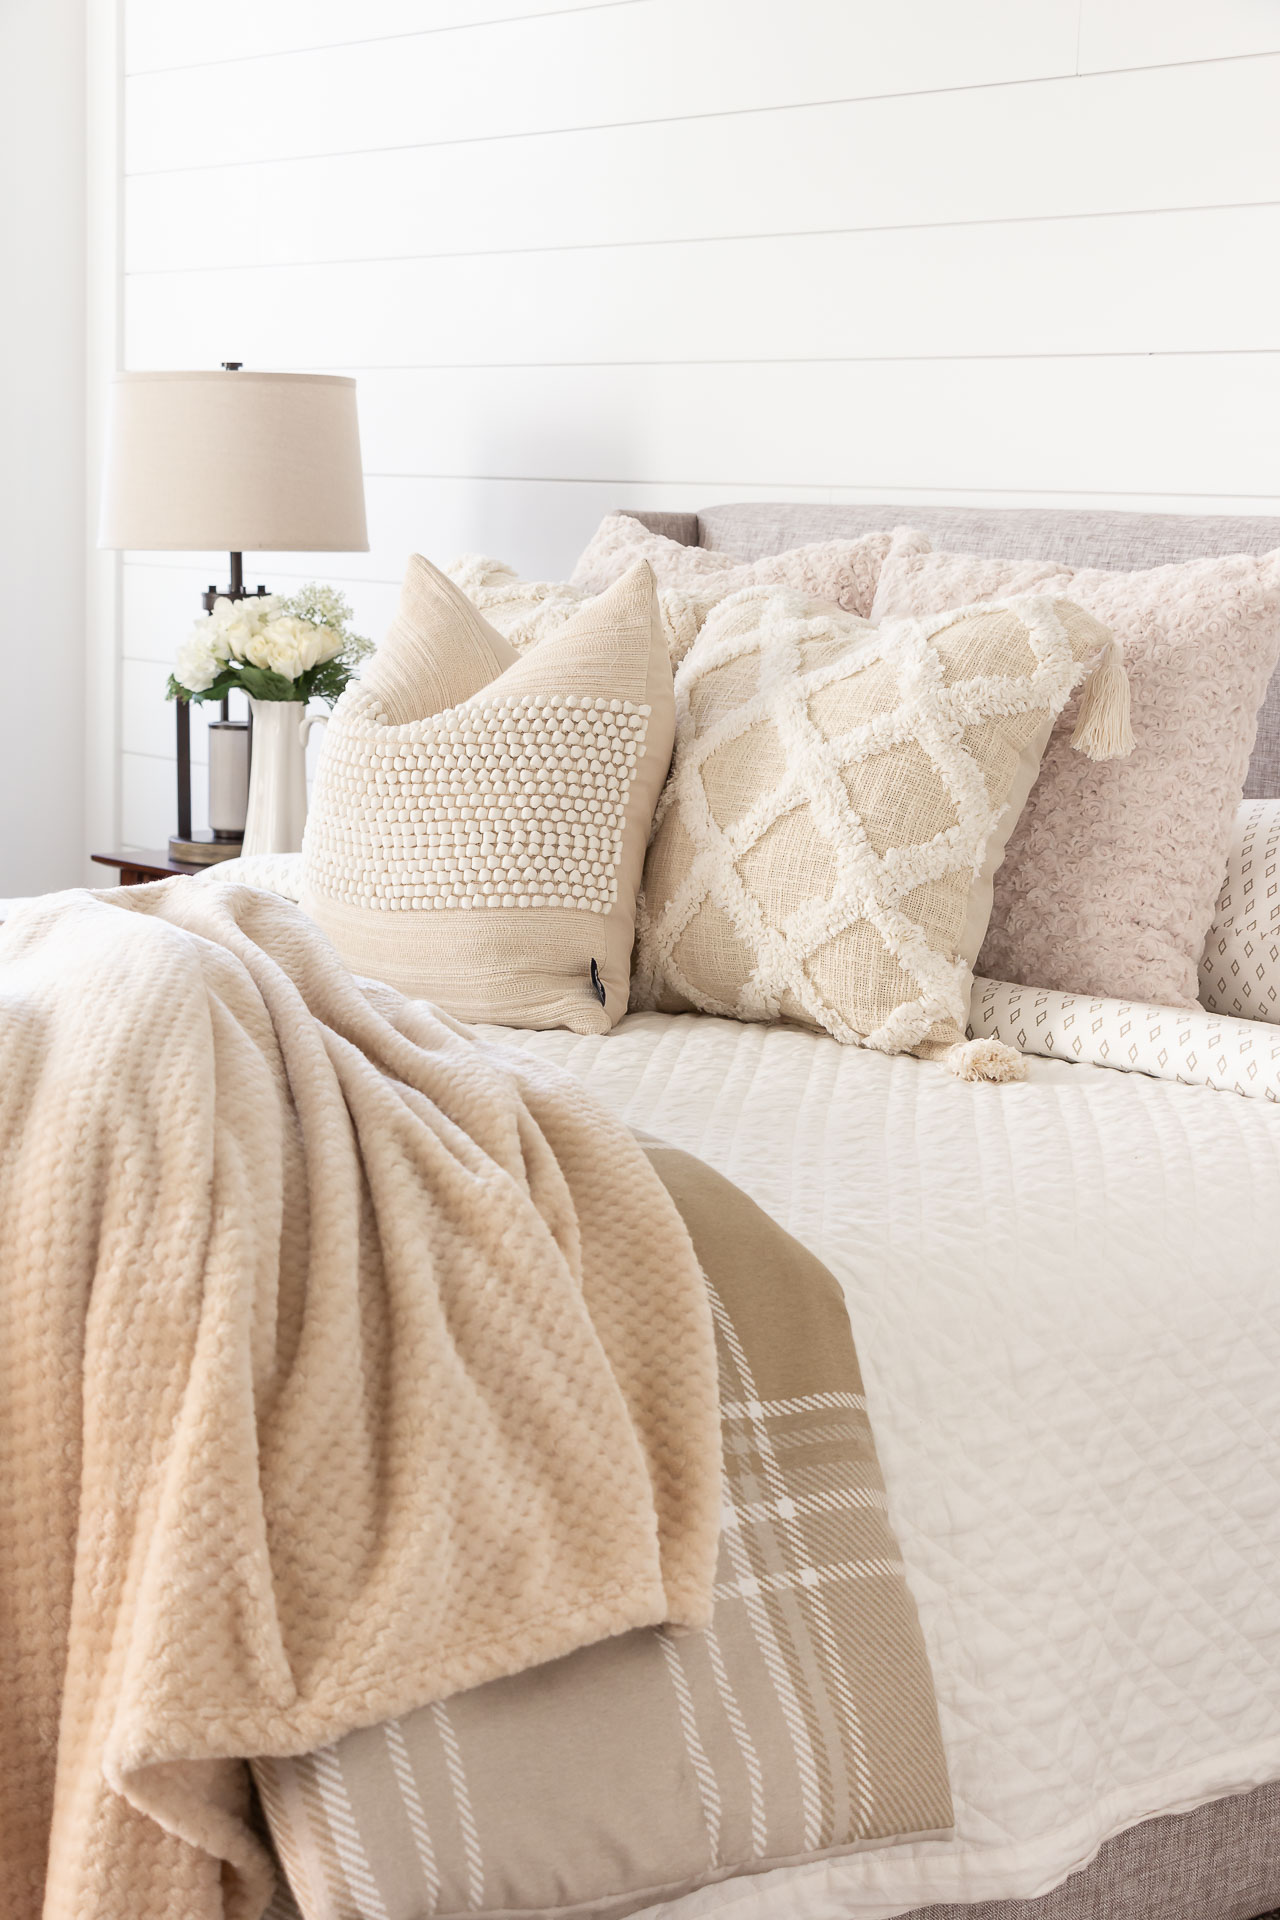 Adding Interest to Layered Neutral Bedding - On Sutton Place